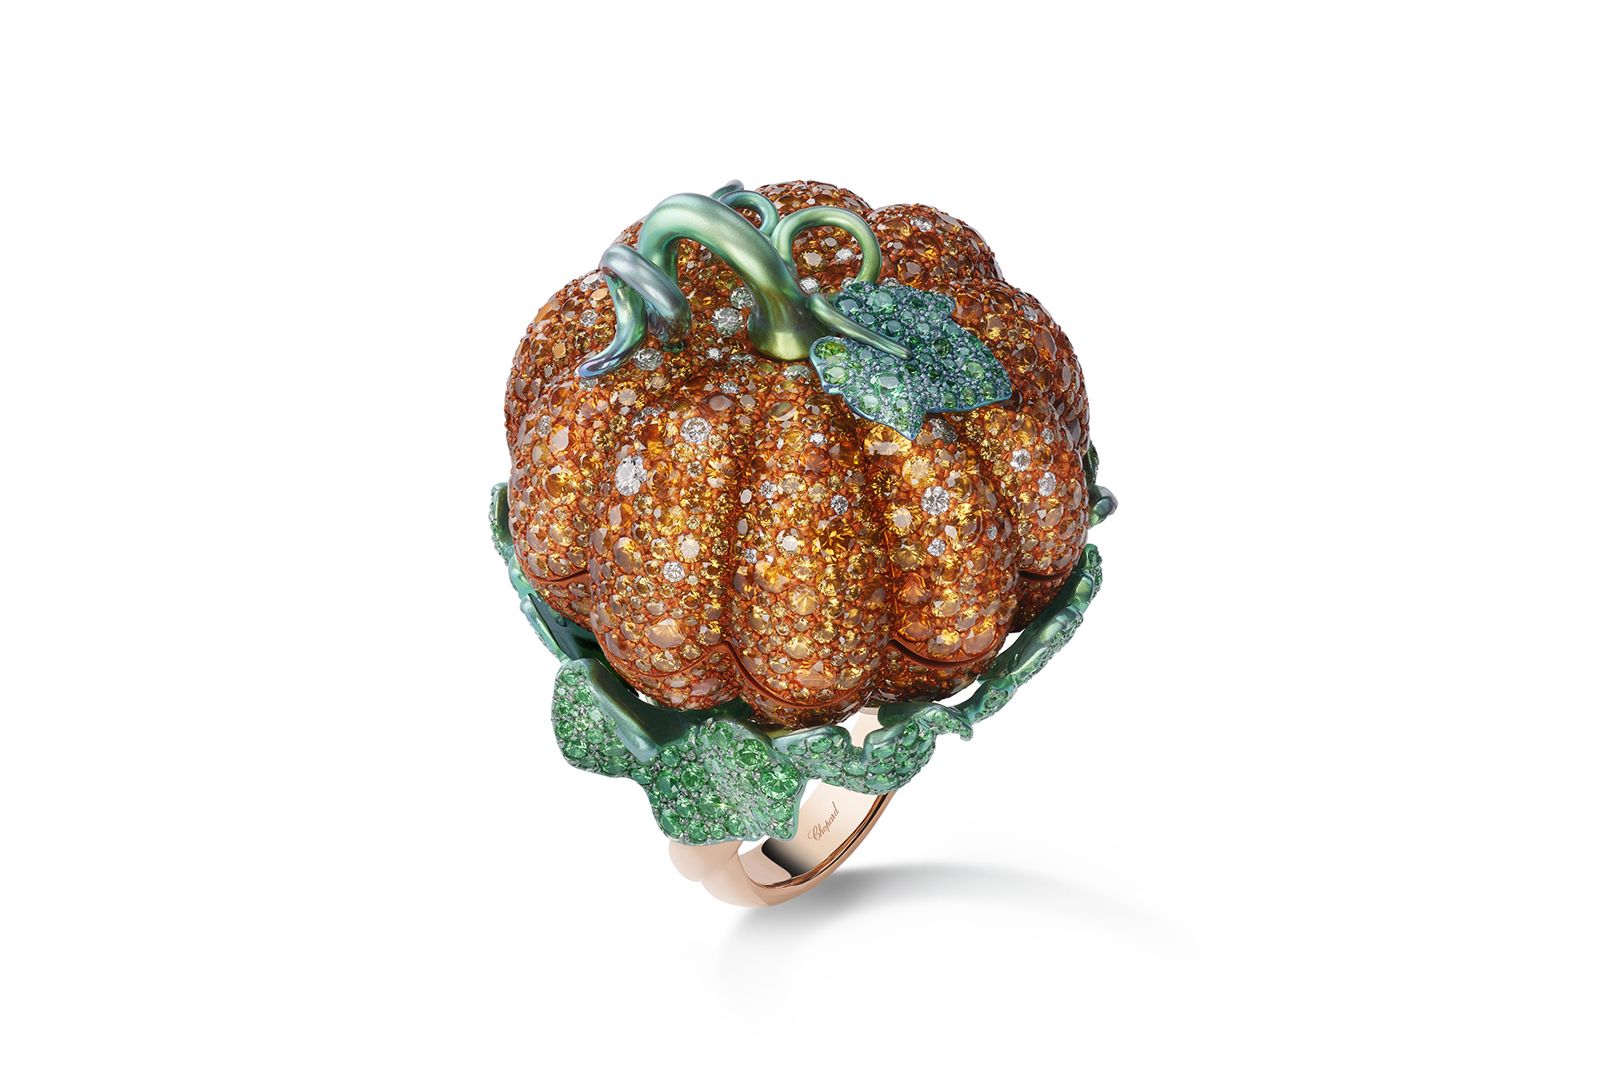 Chopard Pumpkin ring set with spessartite garnets and tsavorites from the Red Carpet High Jewellery collection. The ring opens to reveal a Cinderella-inspired diamond slipper